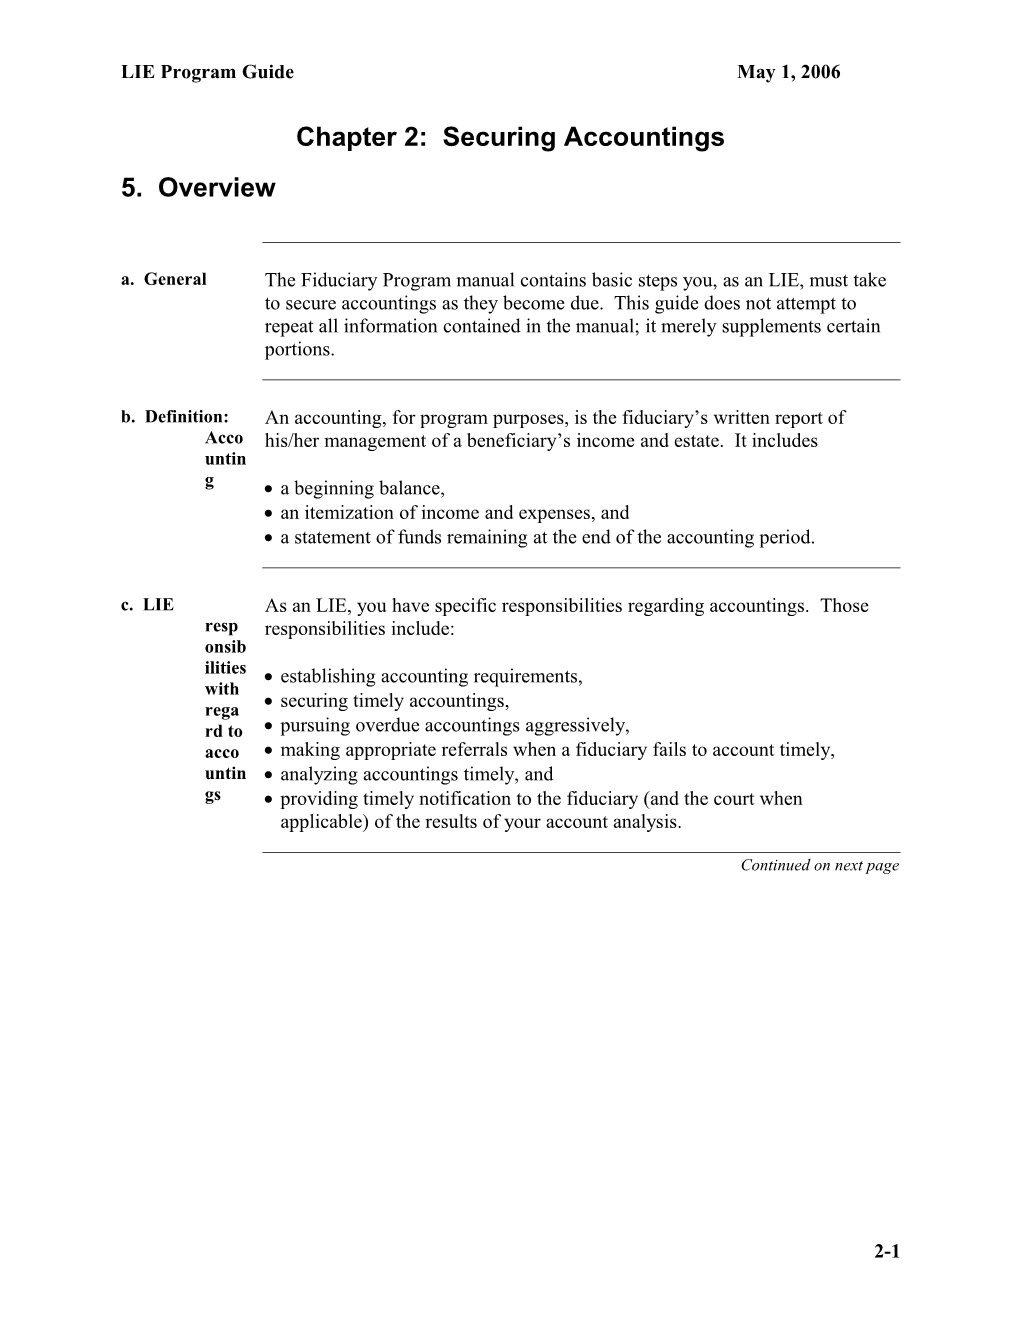 LIE Program Guide, Chapter 2 Securing Accountings